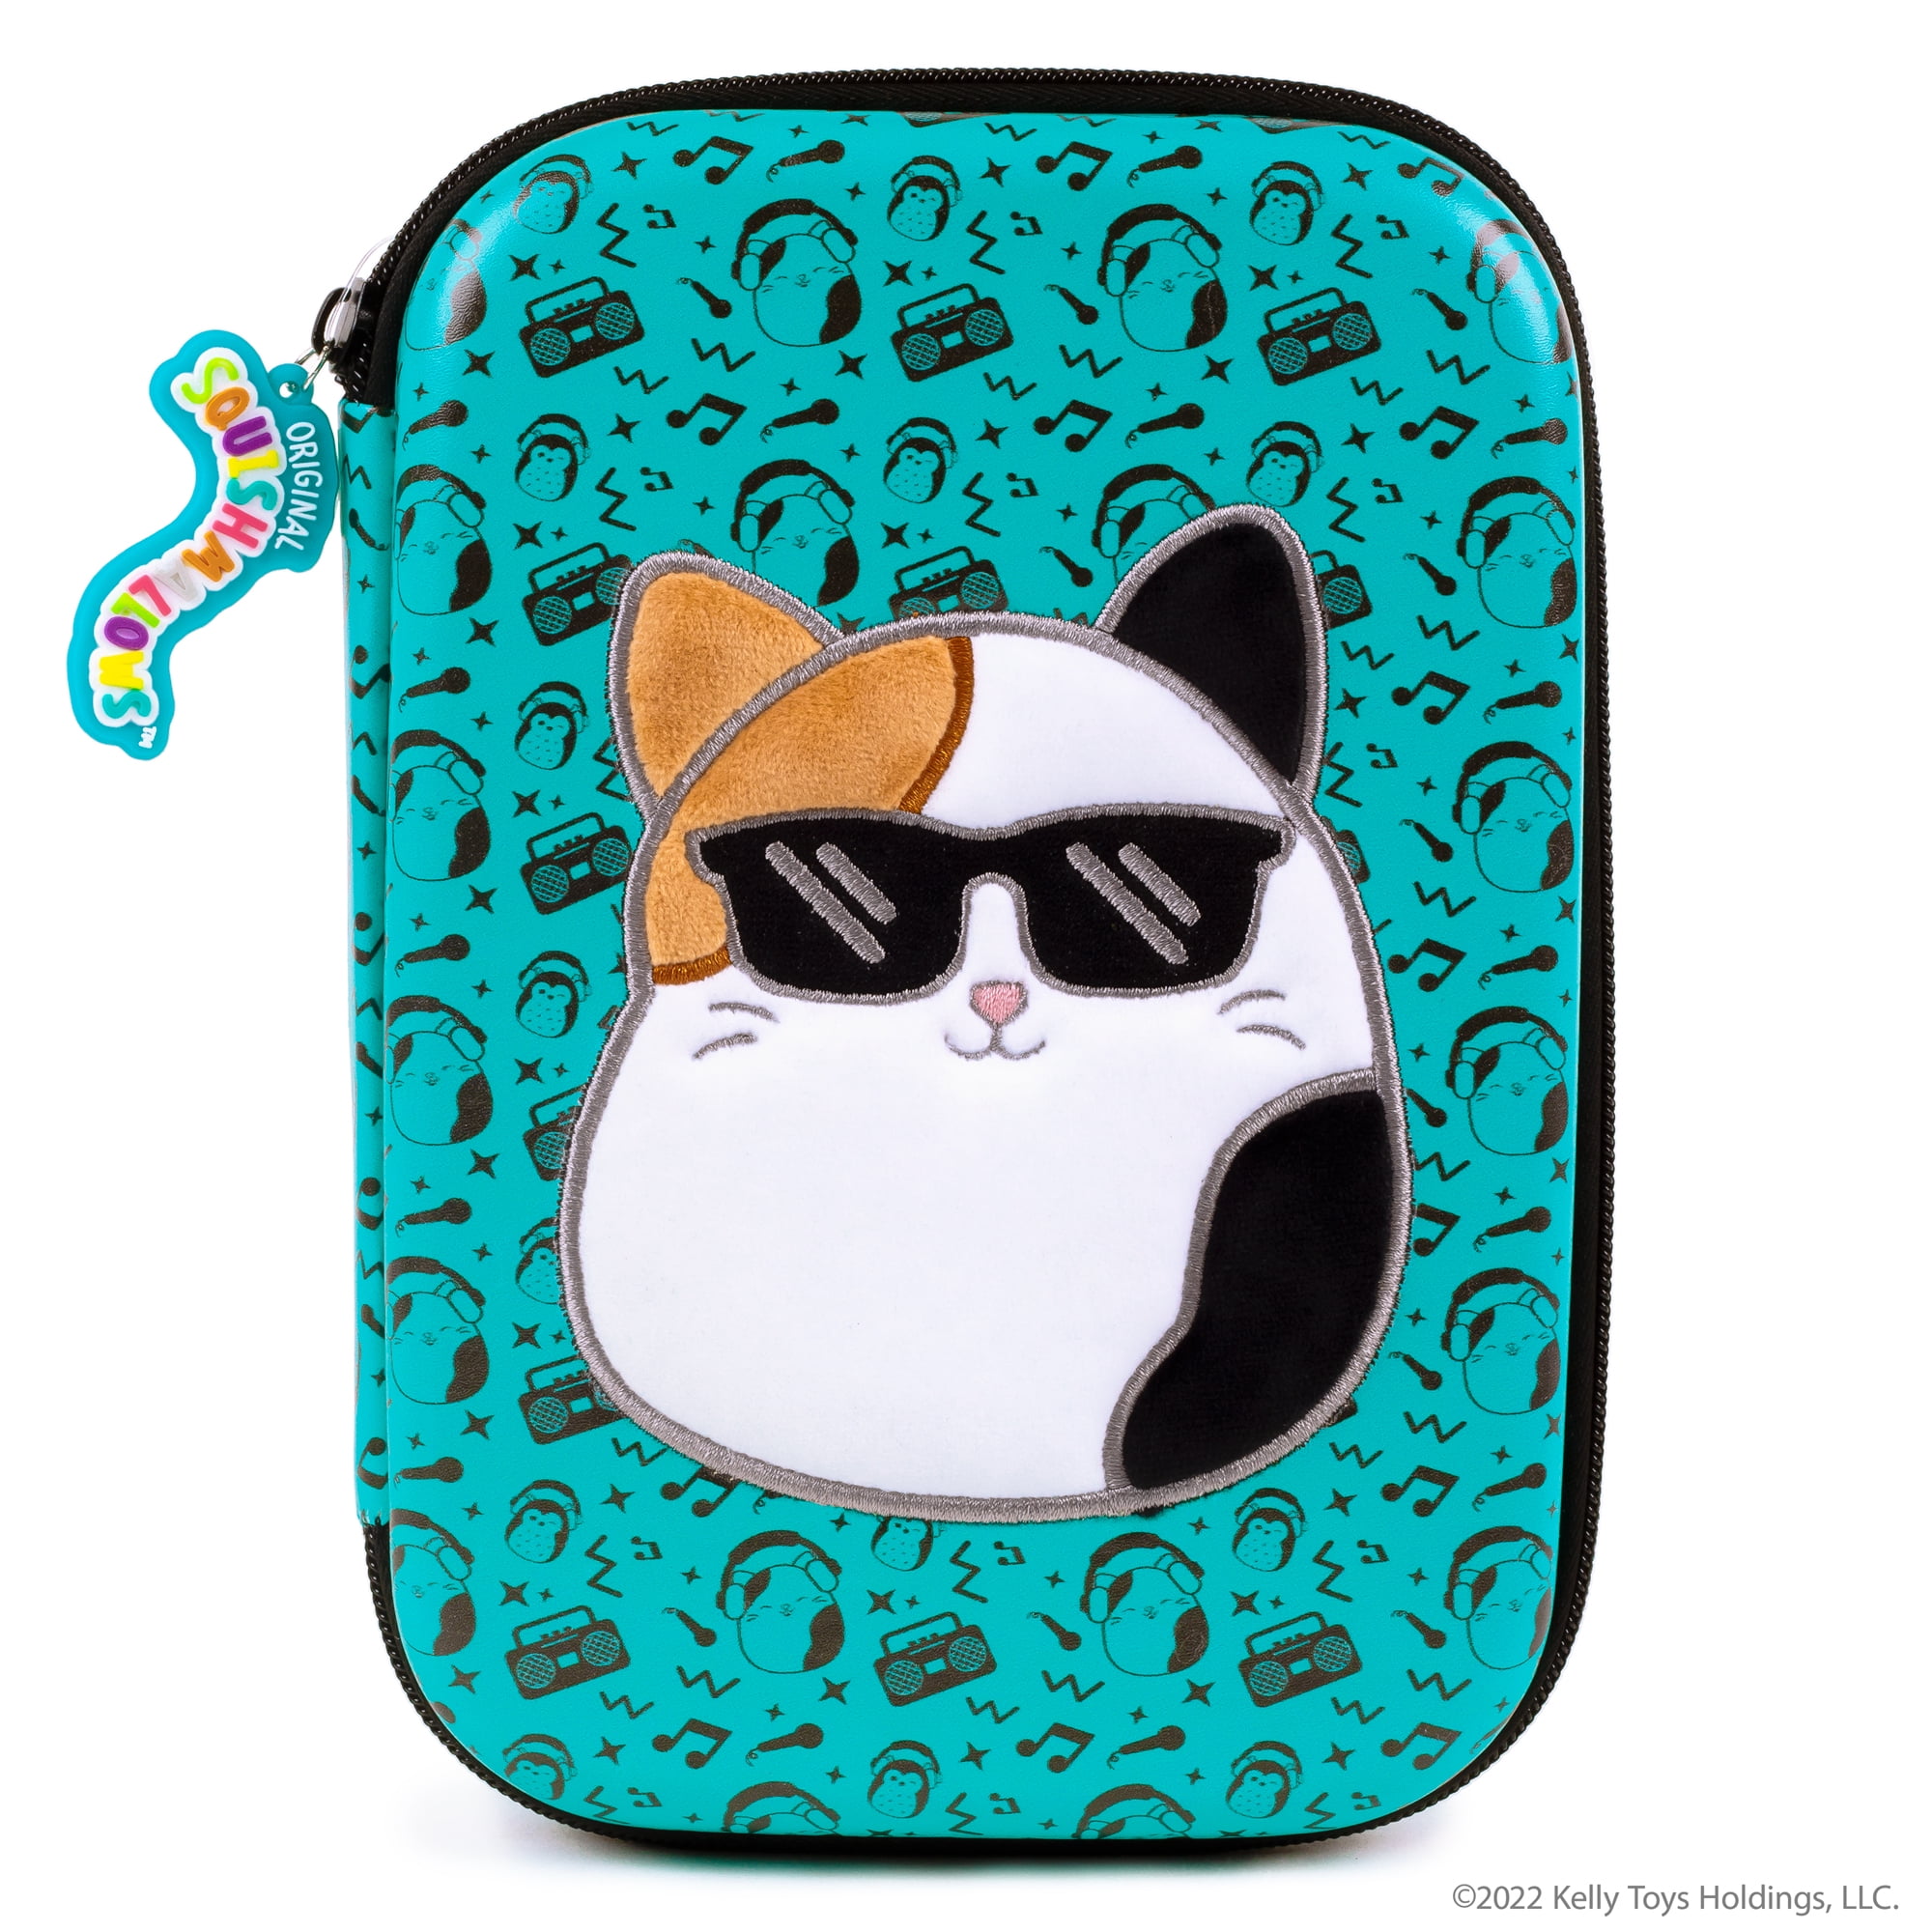 Squishmallows Cam the Cat Pencil Case, Hard Case Supply Box with Zipper ...